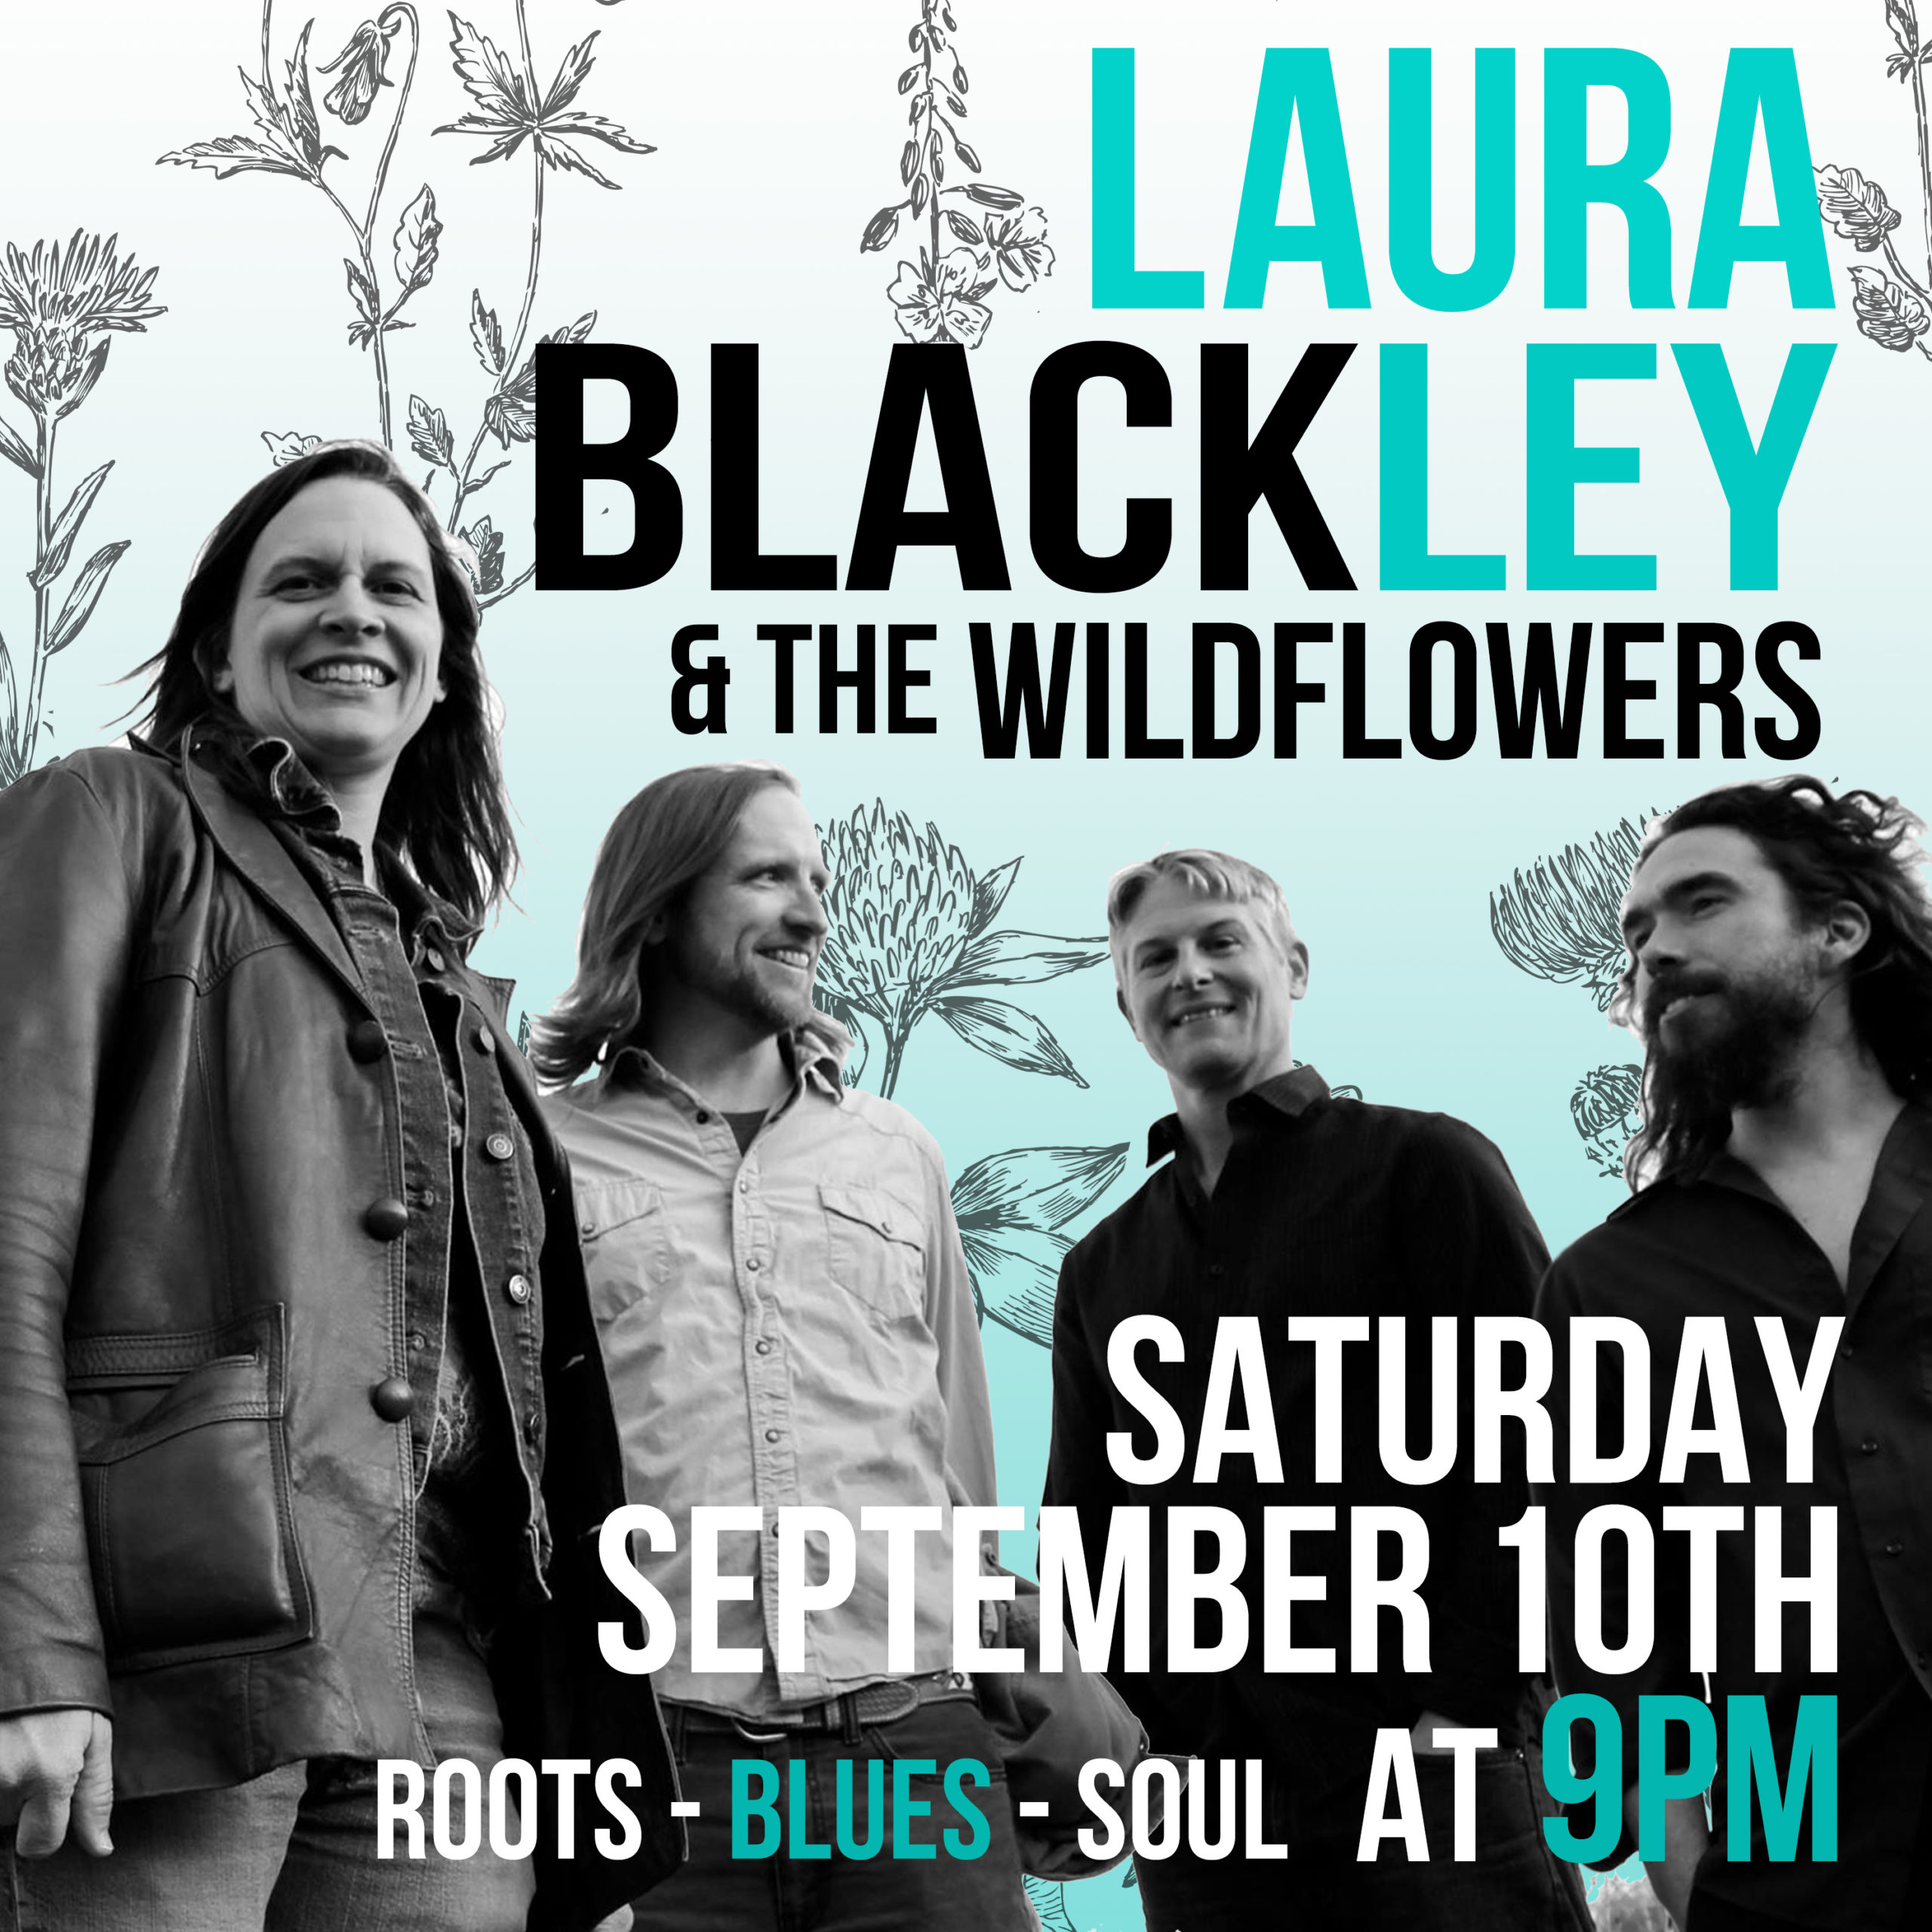 Laura Blackley and the Wildflowers